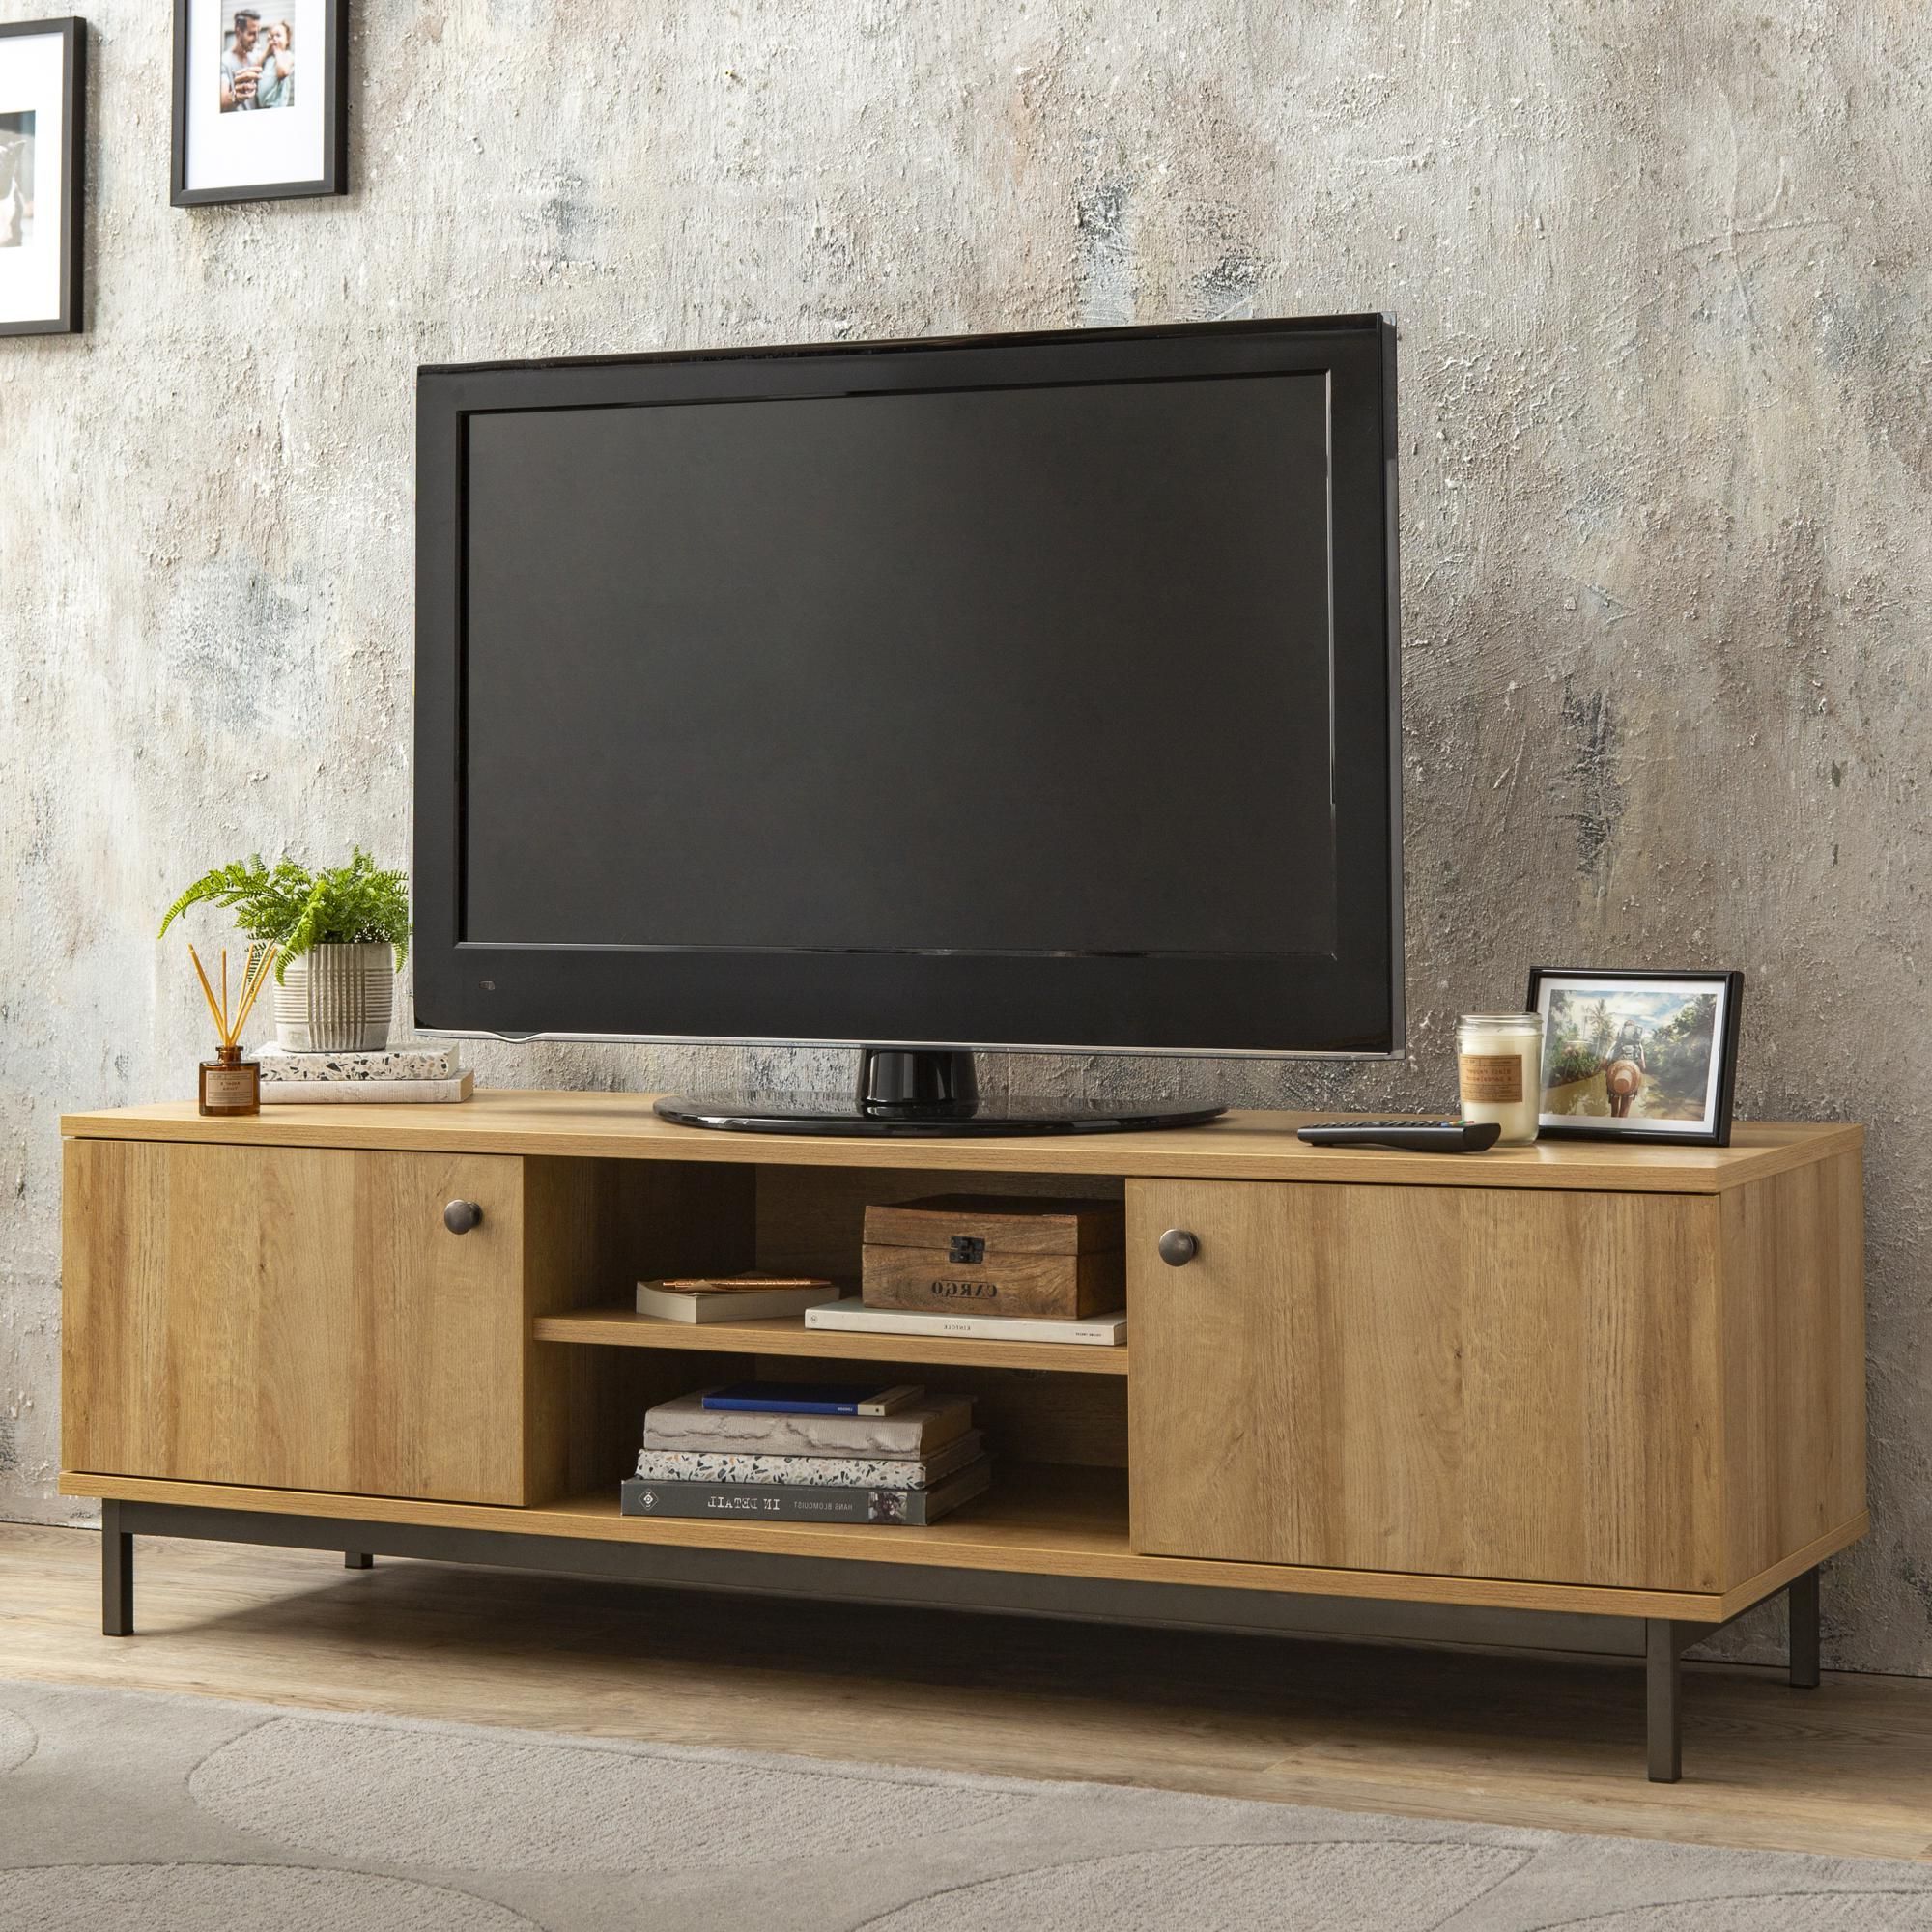 Fulton Oak Effect Wide Tv Stand In 2021 | Living Room Tv Regarding Fulton Tv Stands (View 8 of 20)